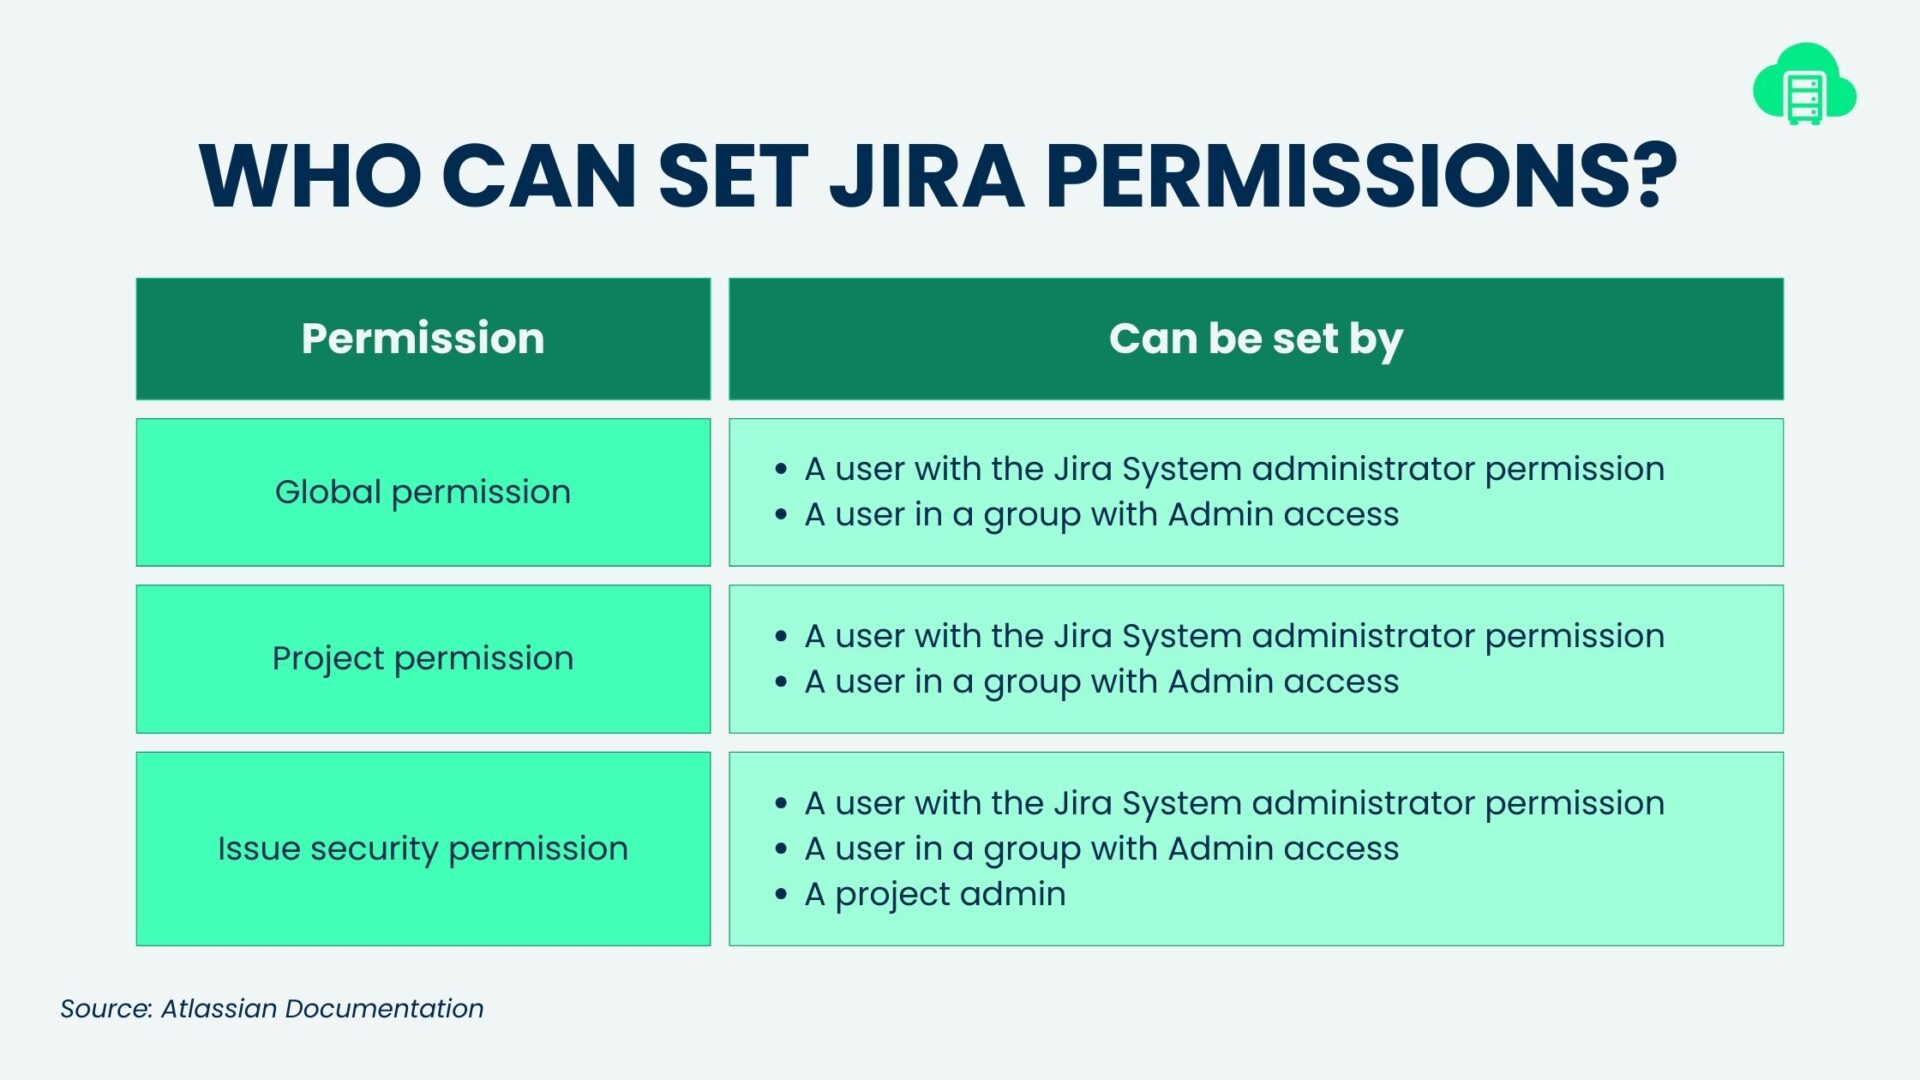 Who can set Jira permissions